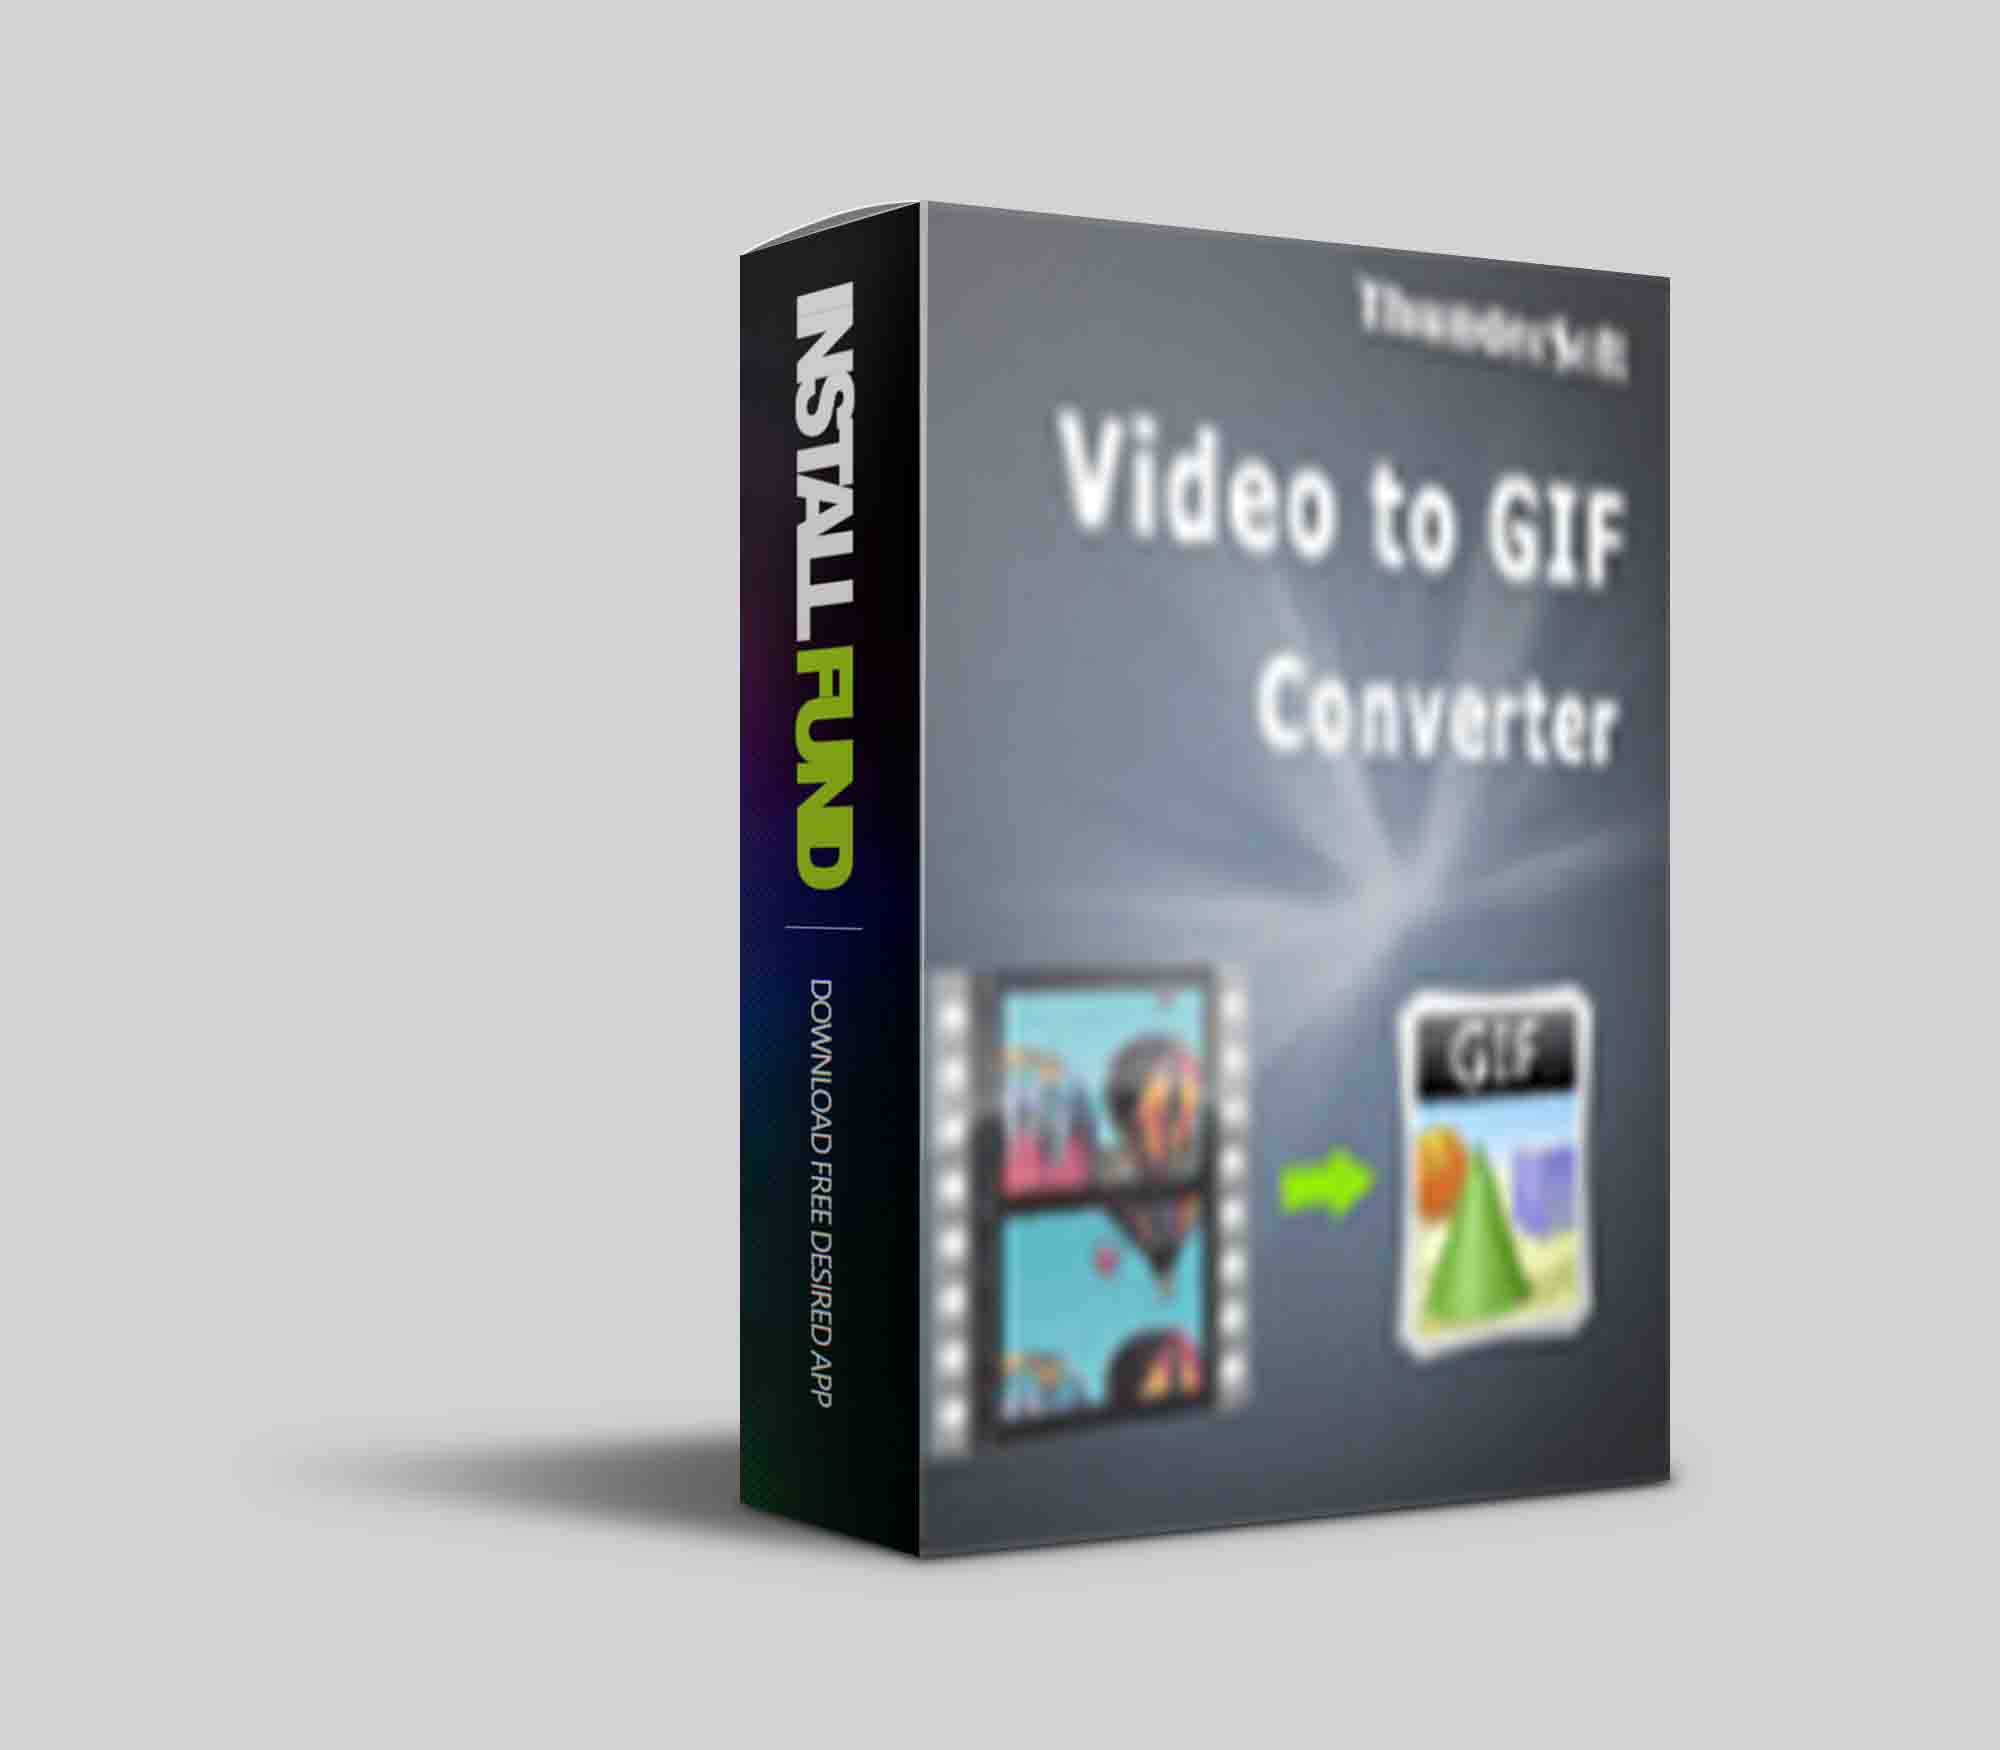 download the last version for ipod ThunderSoft Flash to Video Converter 5.2.0